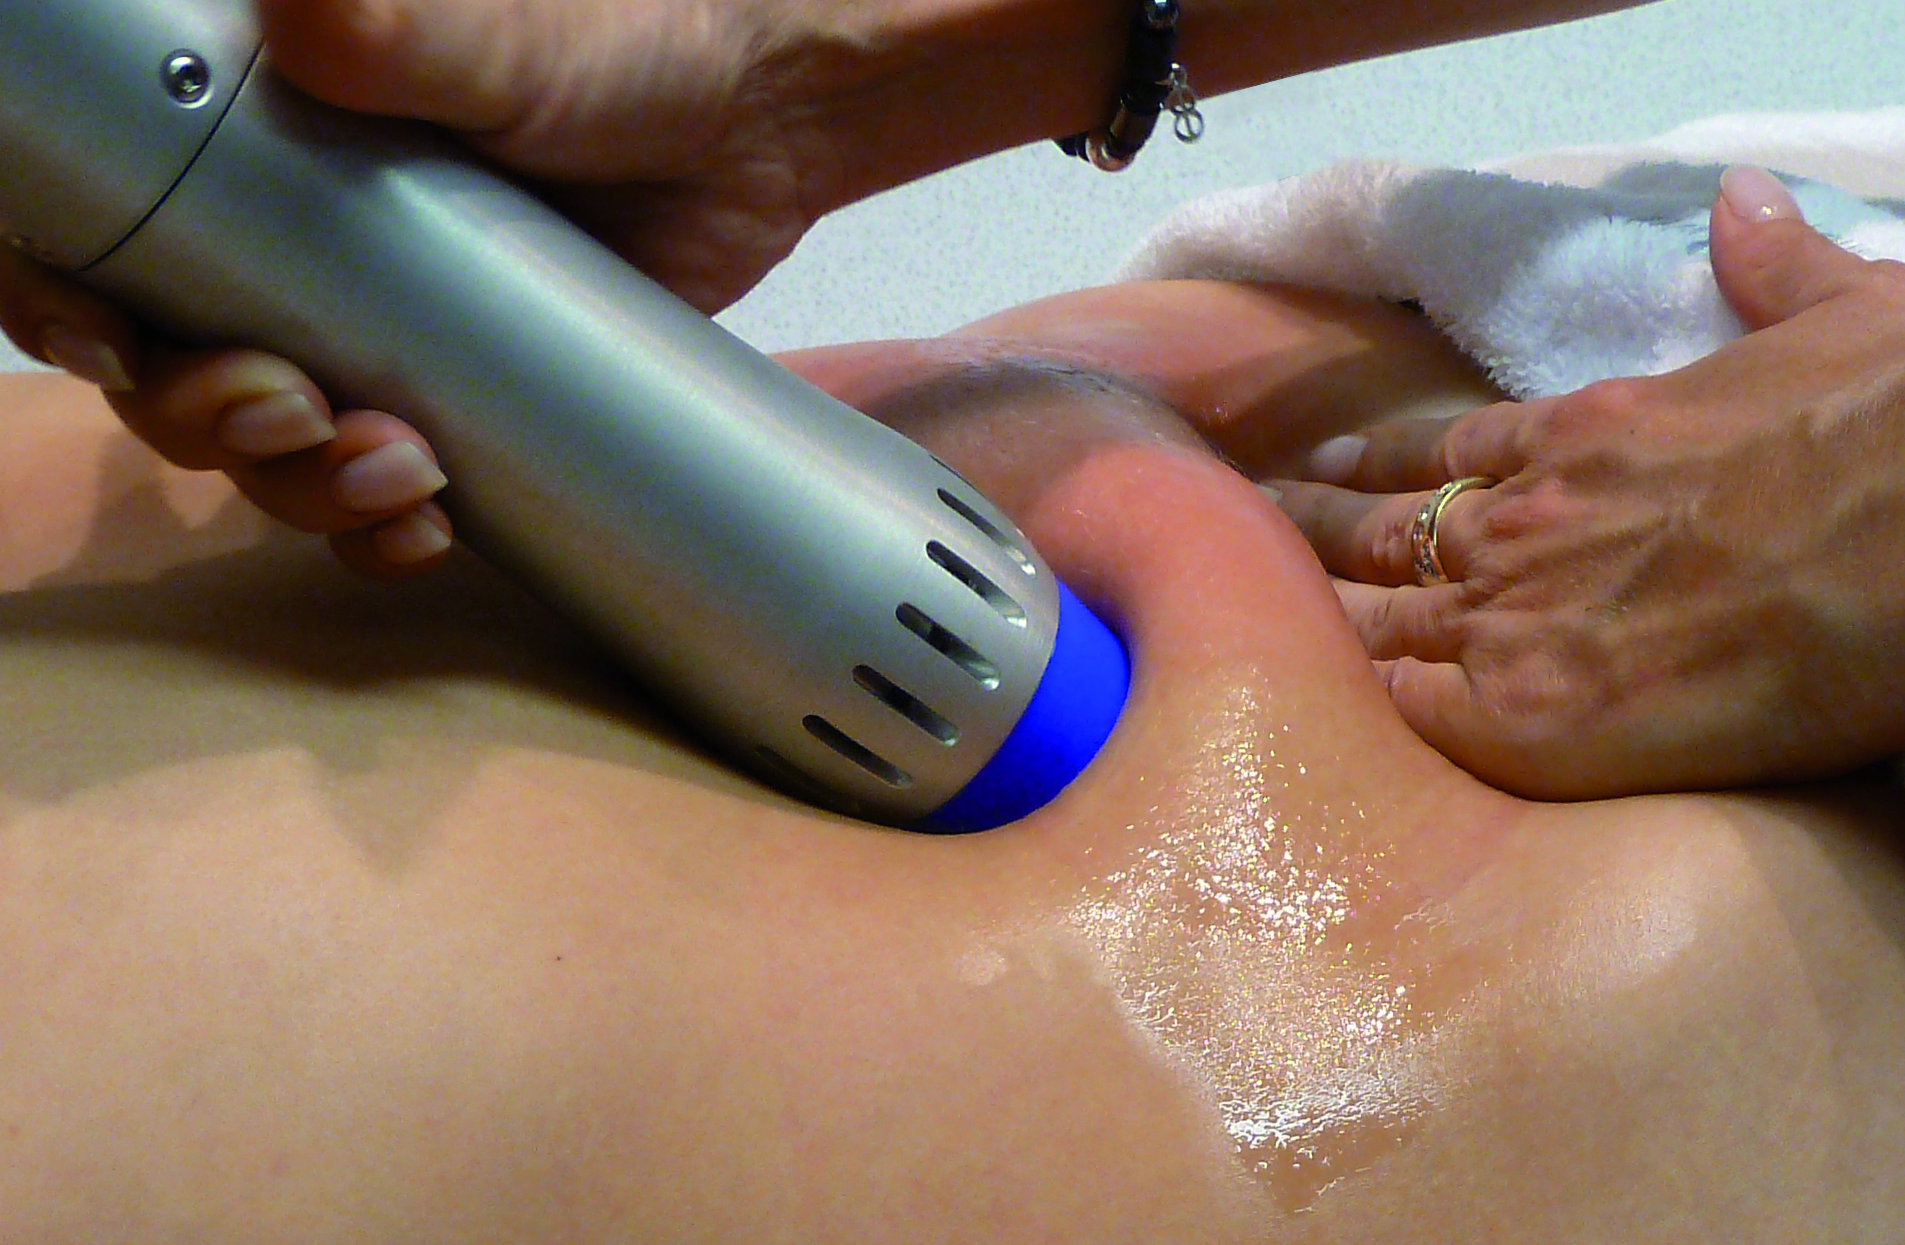 Zimmer ZWave Acoustical Wave Therapy to Stimulate Collagen Formation